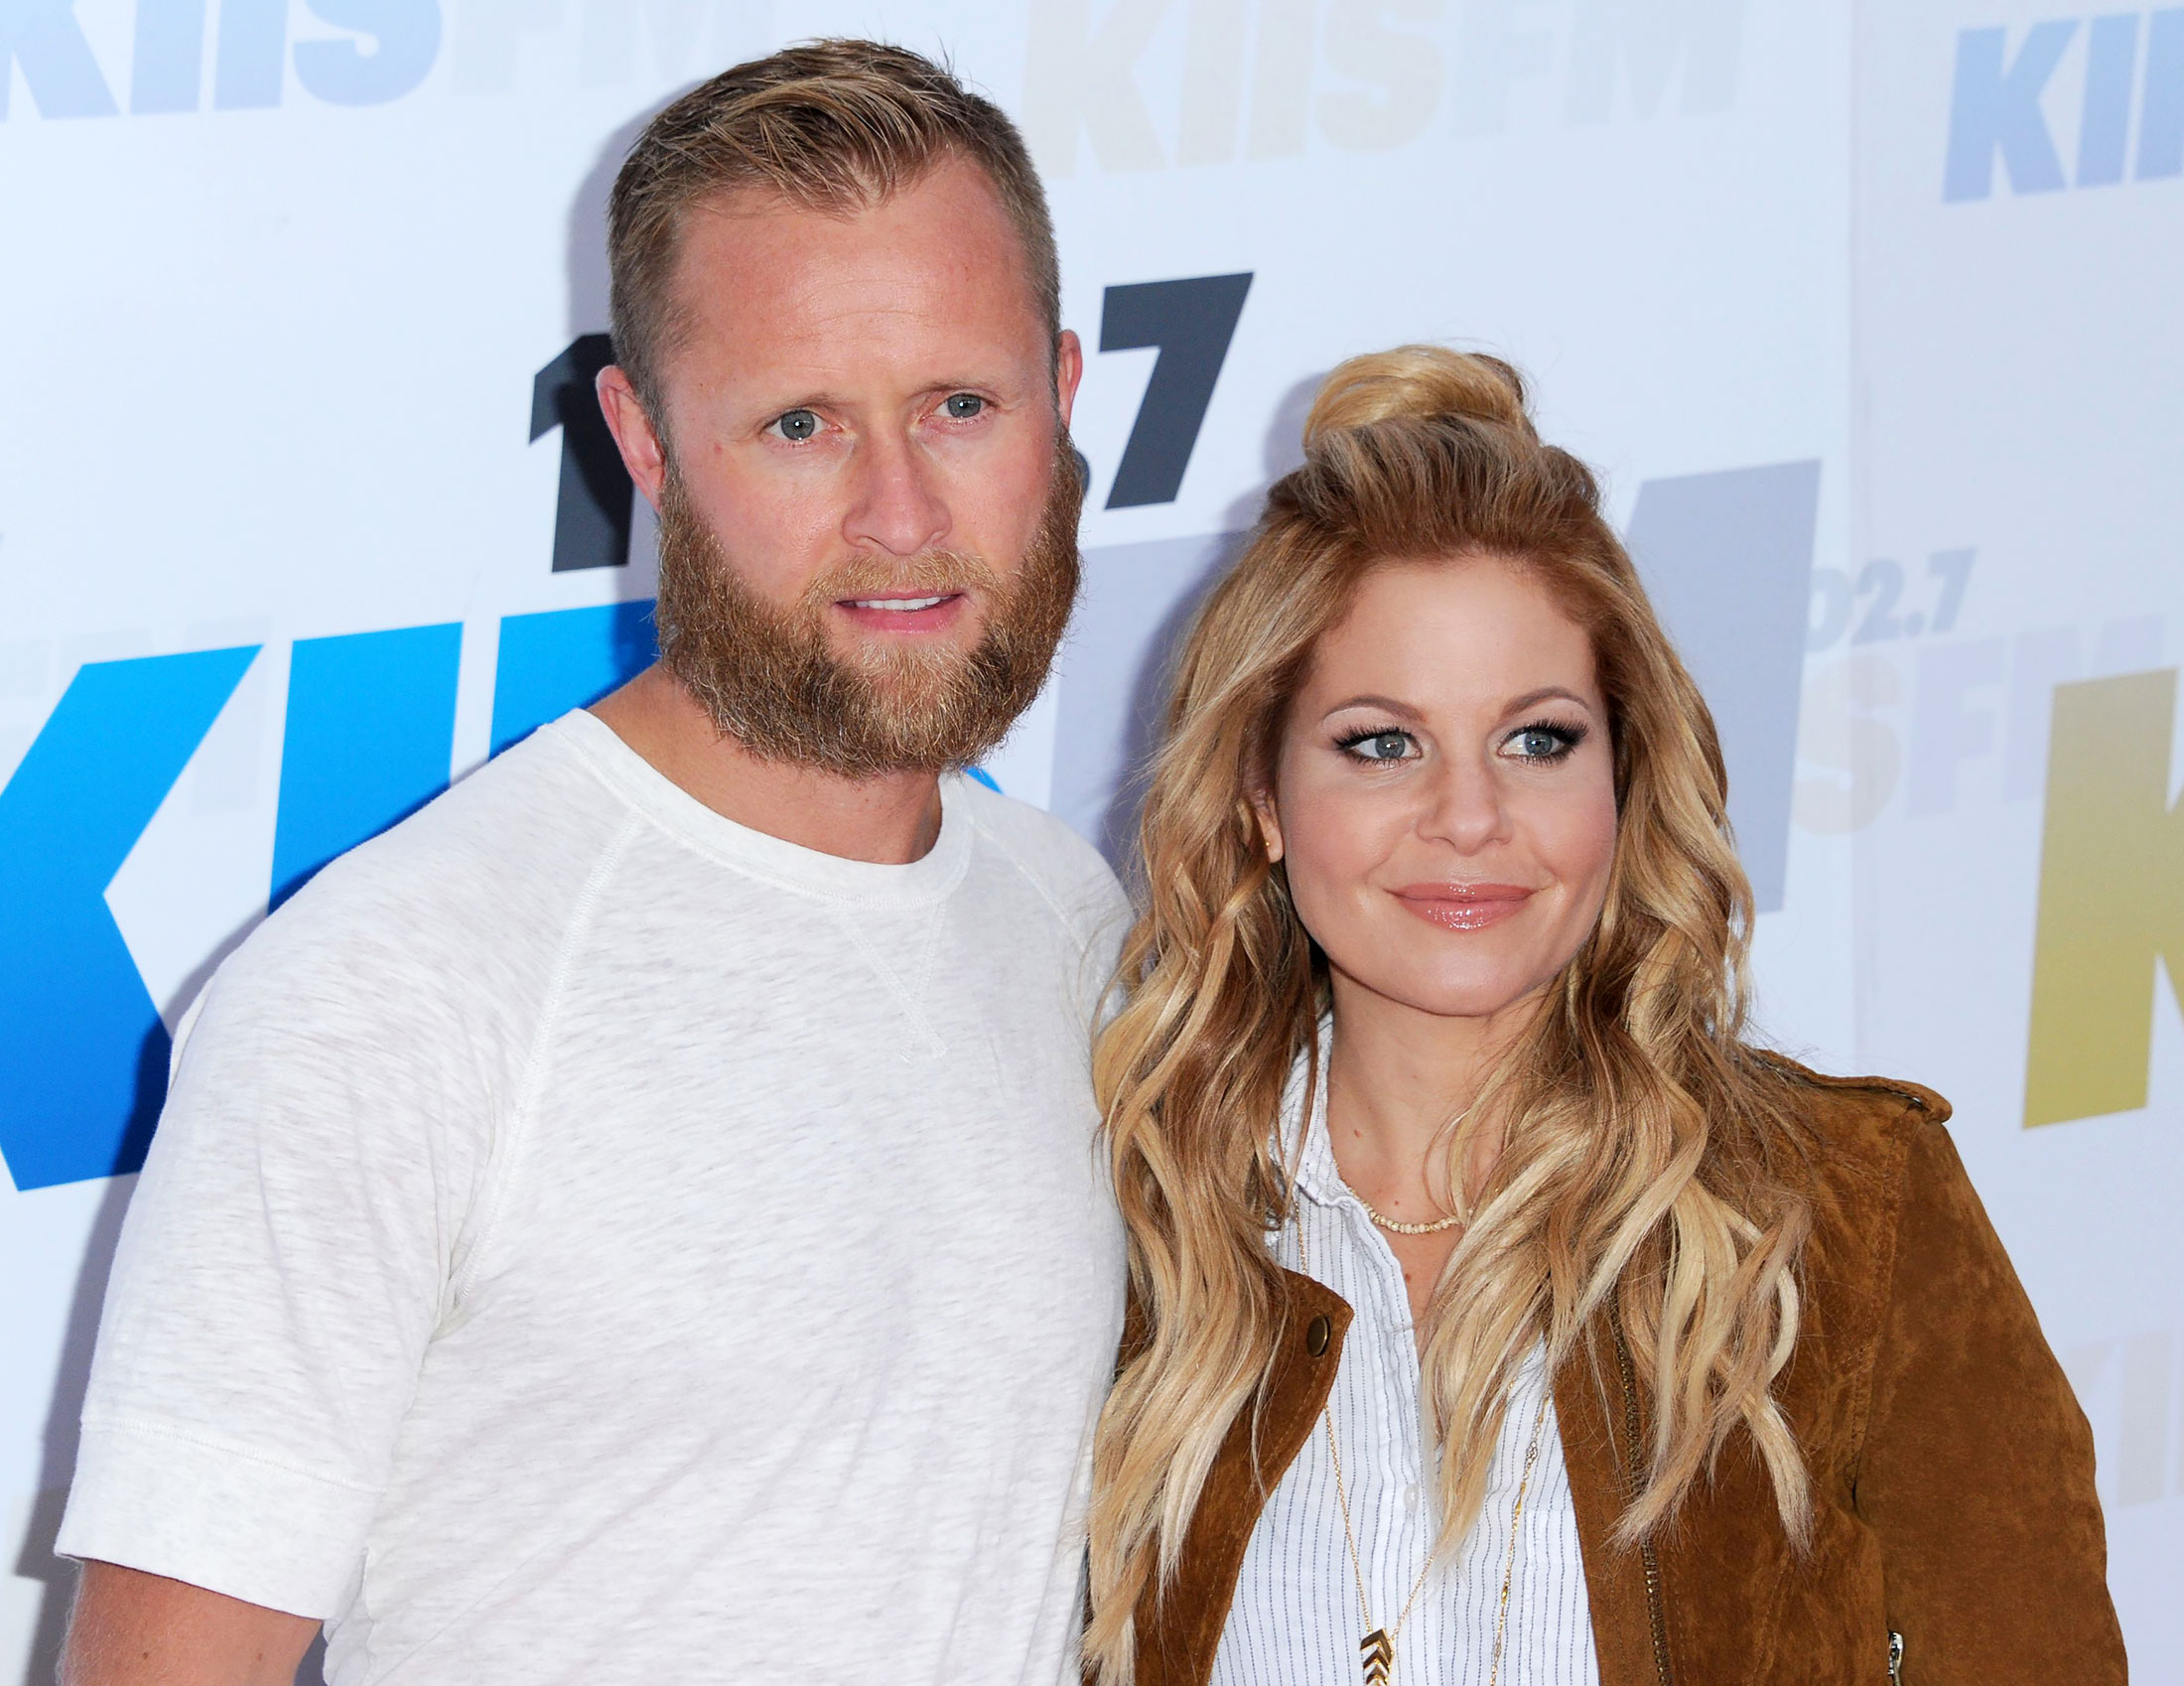 Married candace cameron is who to Candace Cameron